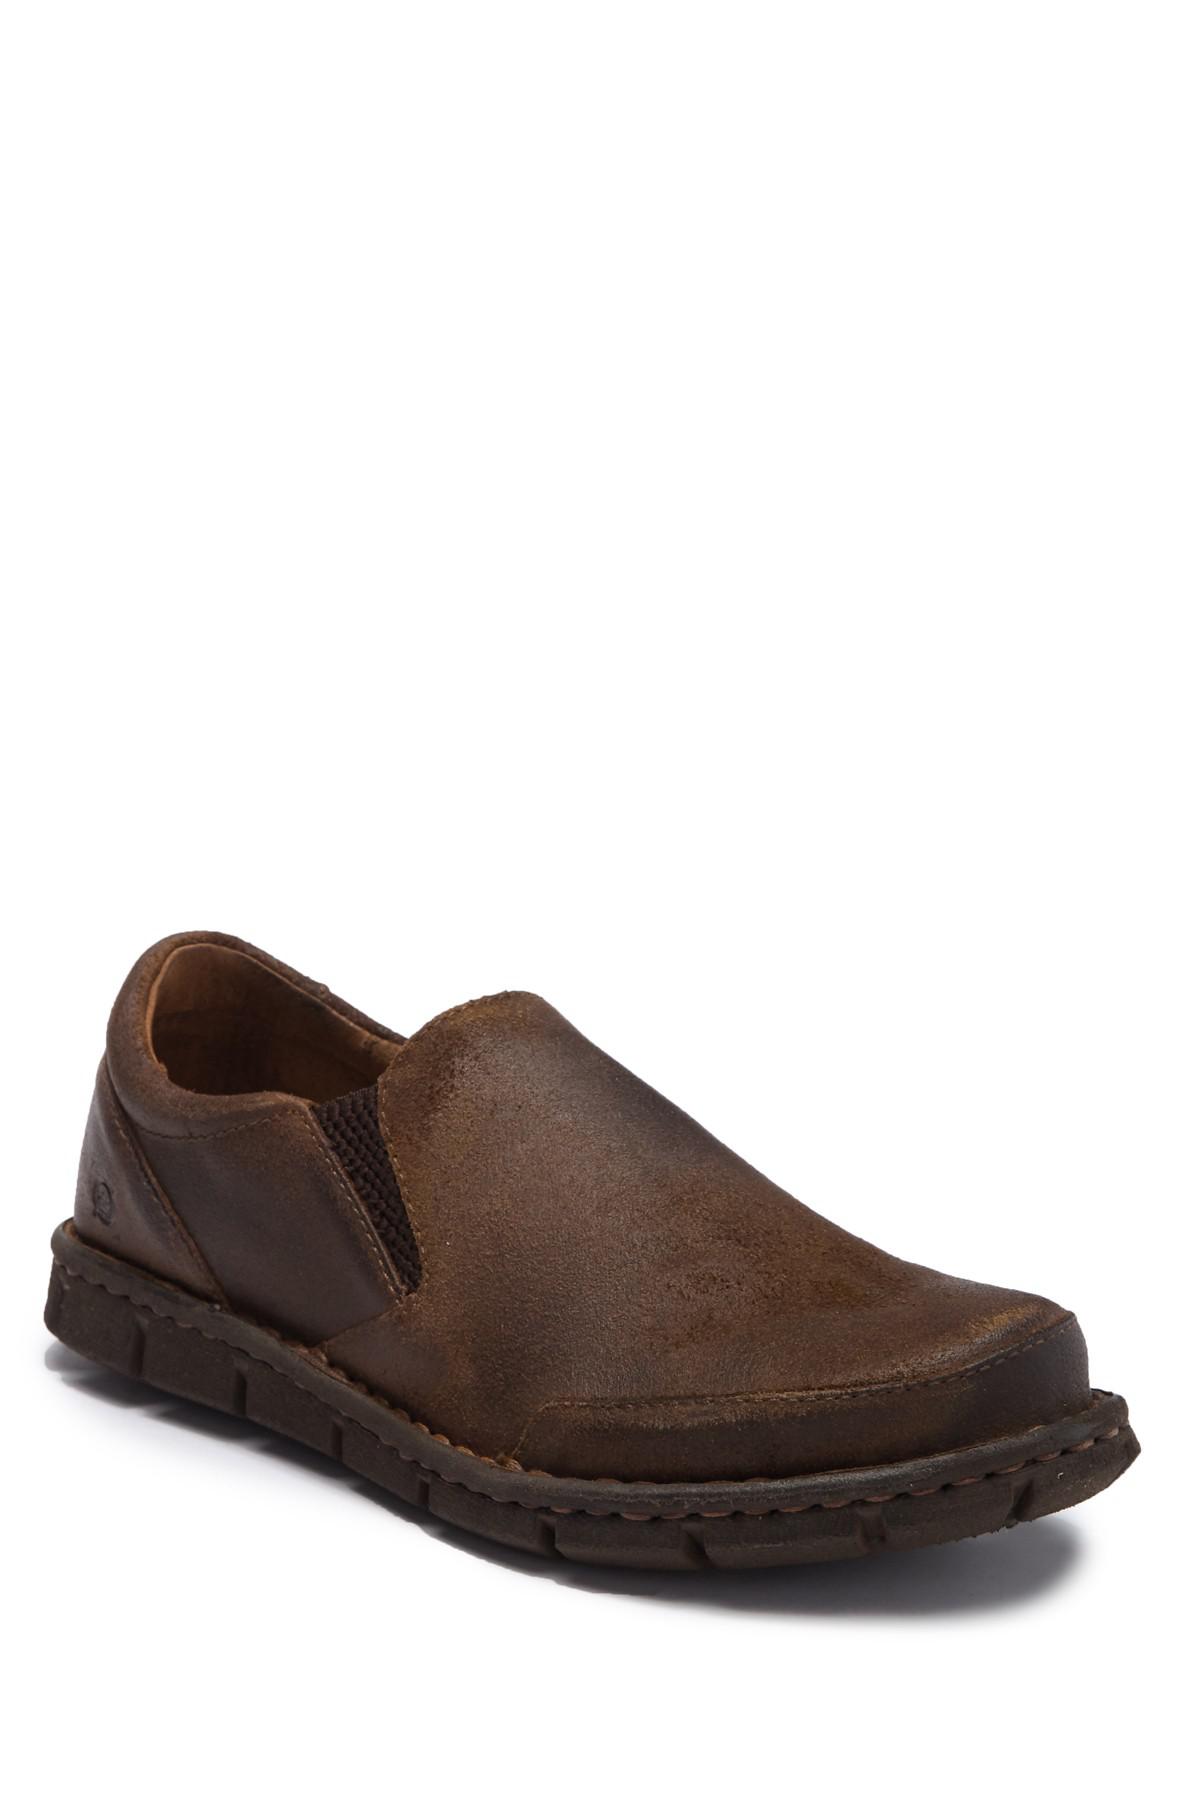 Born Suede Stan Loafer in Brown for Men 